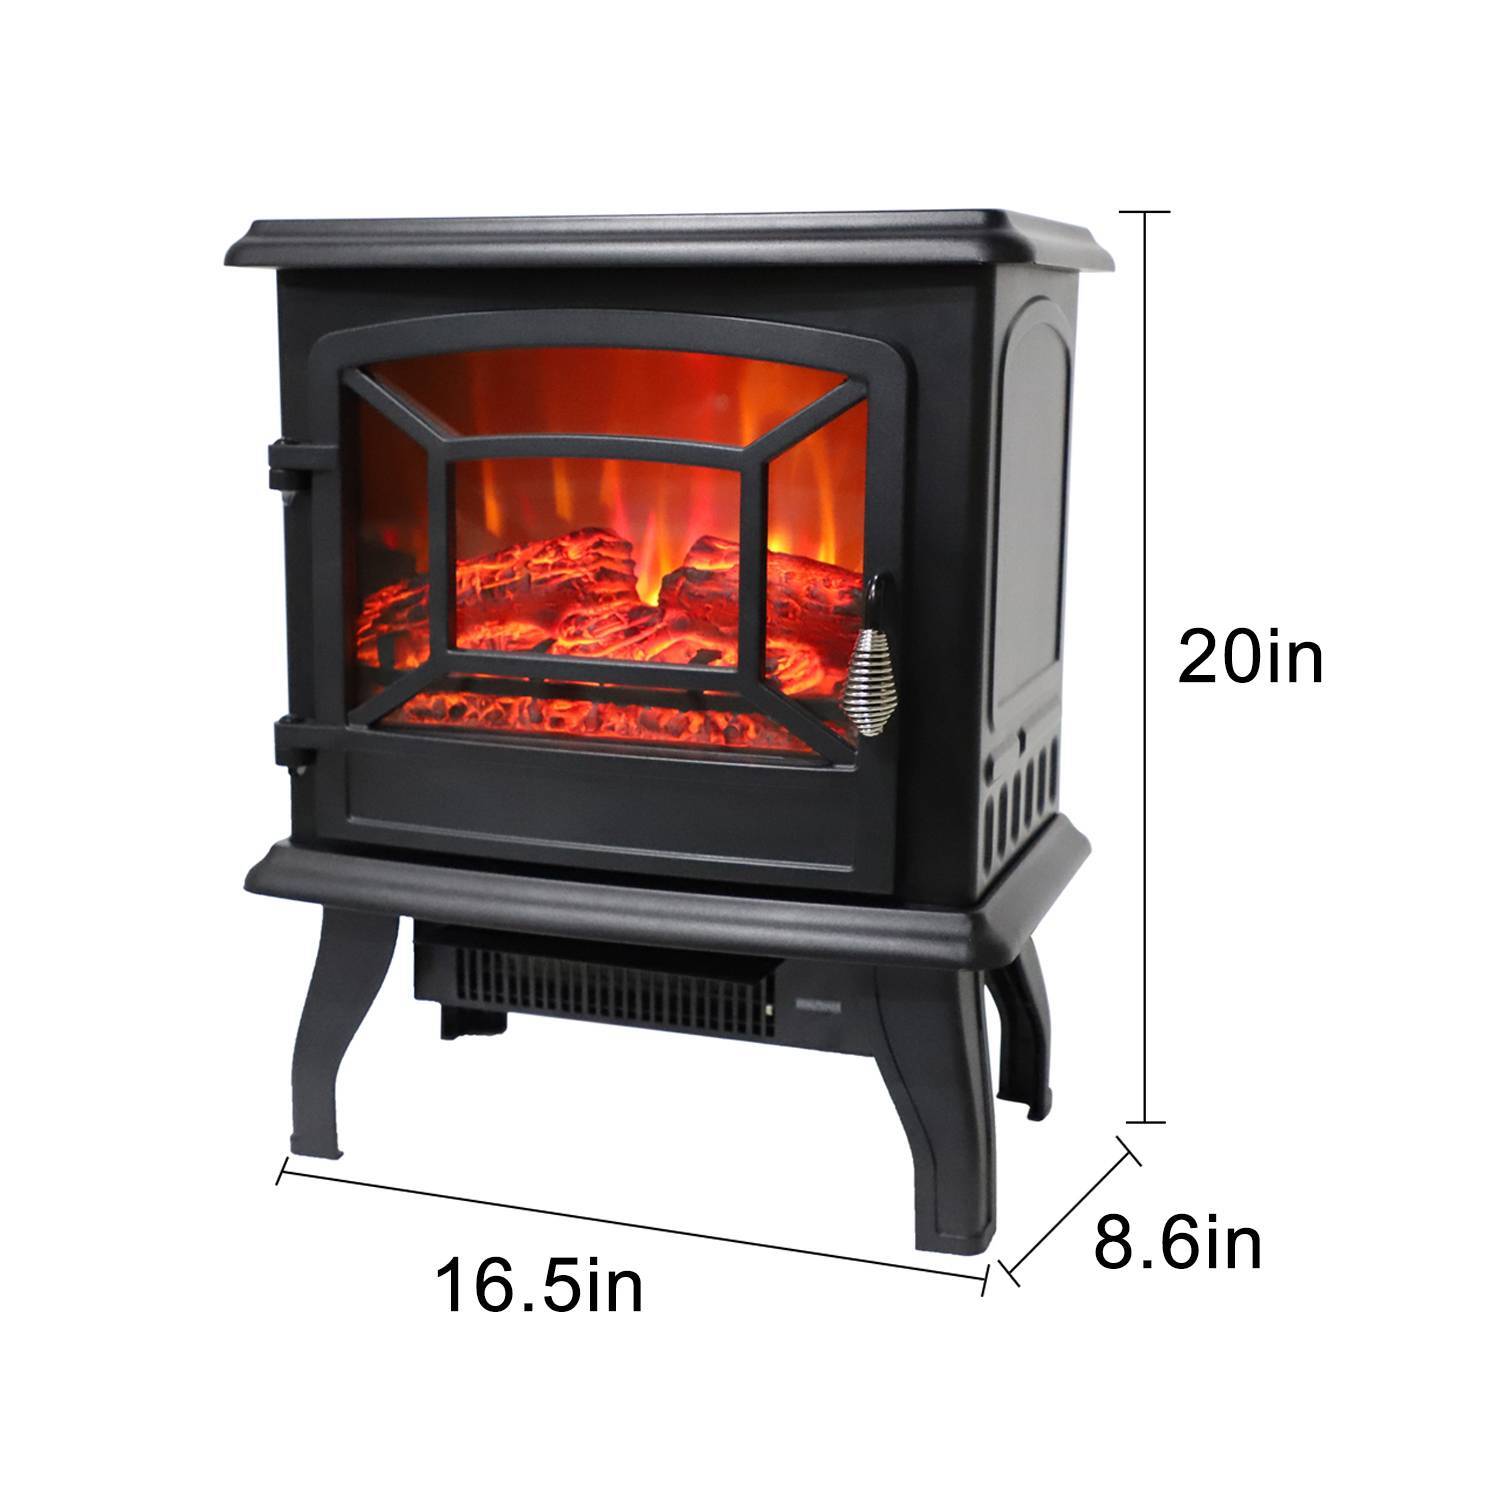 17 inch 1400w Fireplace Fake Wood Heating Wire Temperature Control Knob with NTC 17 inch 1400w Fireplace Fake Wood Heating Wire Temperature Control Knob with NTC Fireplaces,Fireplaces & Stoves,Heating,Cooling & Air,Home Improvement